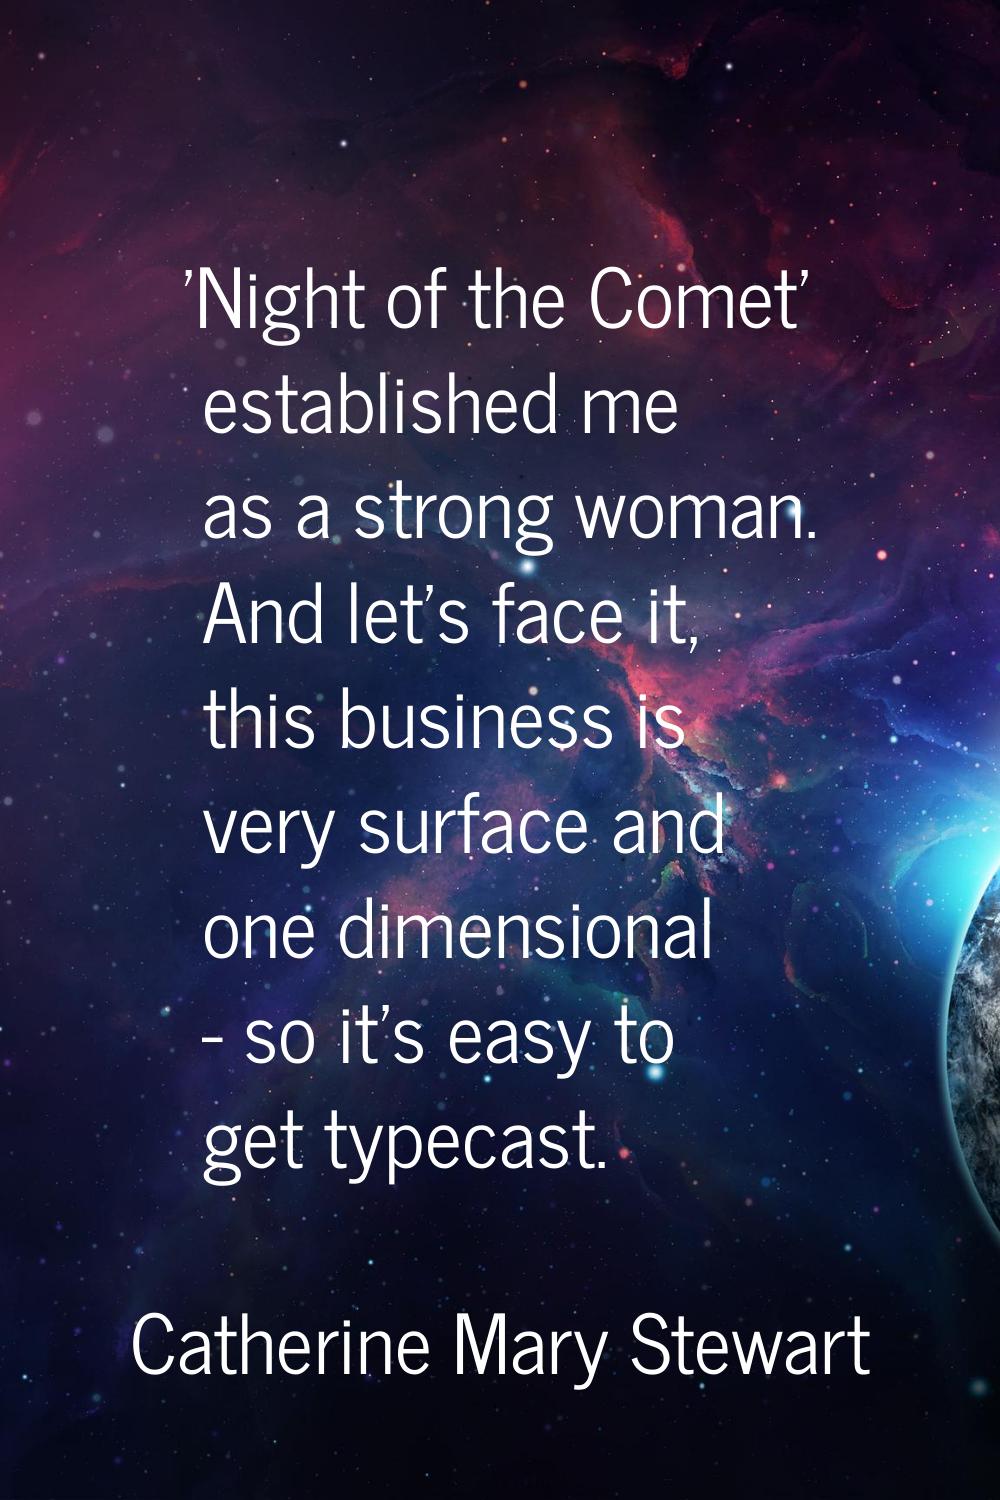 'Night of the Comet' established me as a strong woman. And let's face it, this business is very sur